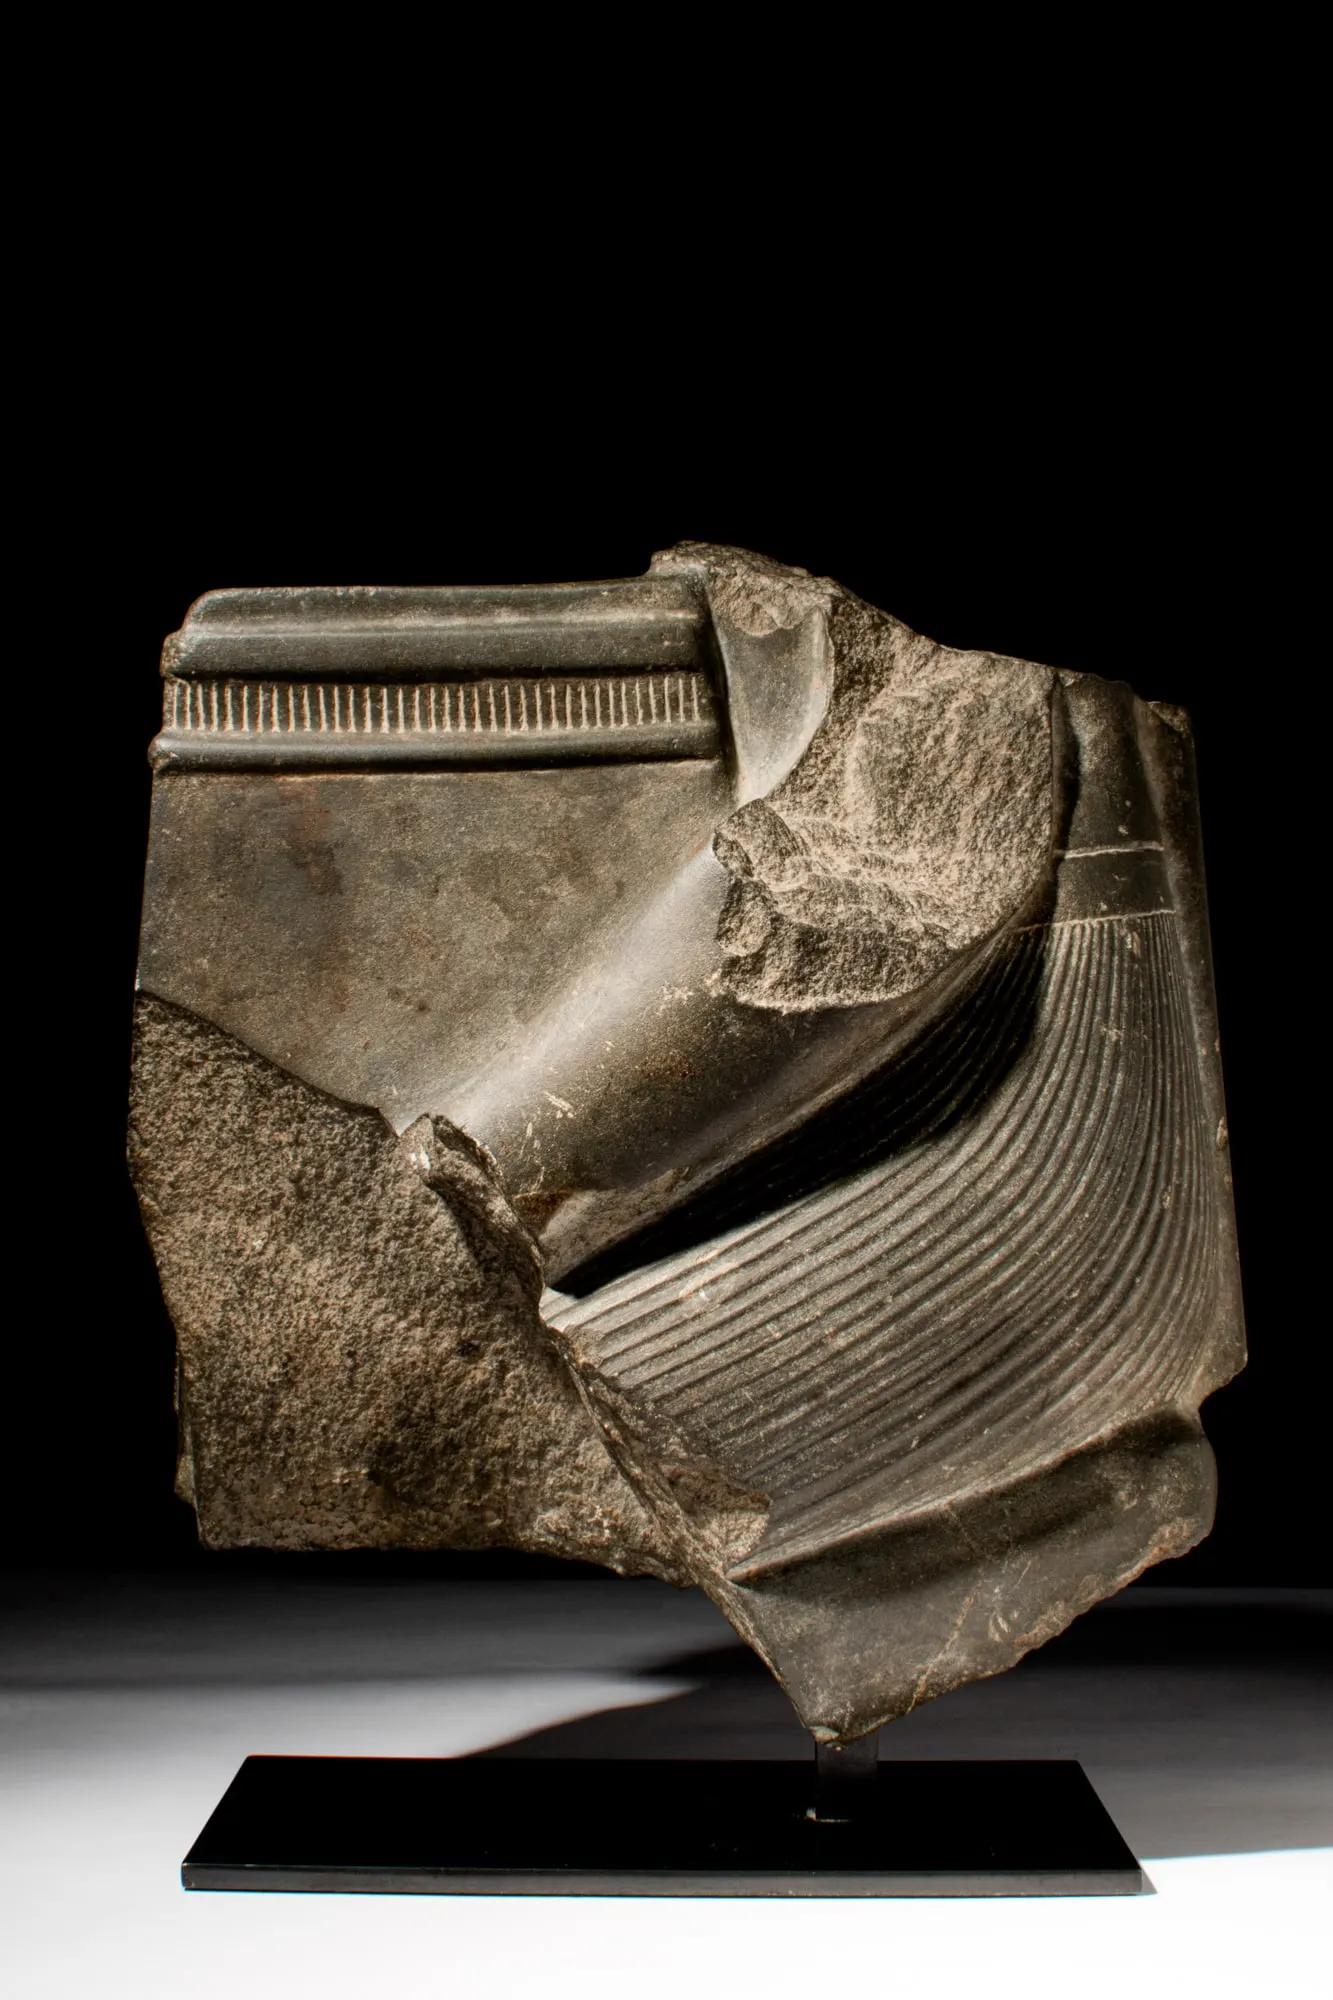 Late Period, 26th Dynasty (circa 590-570 BC) graywacke fragment of a figure in a kneeling position, which sold for £22,000 (£27,500 or $34,880 with buyer’s premium) at Apollo Art Auctions.